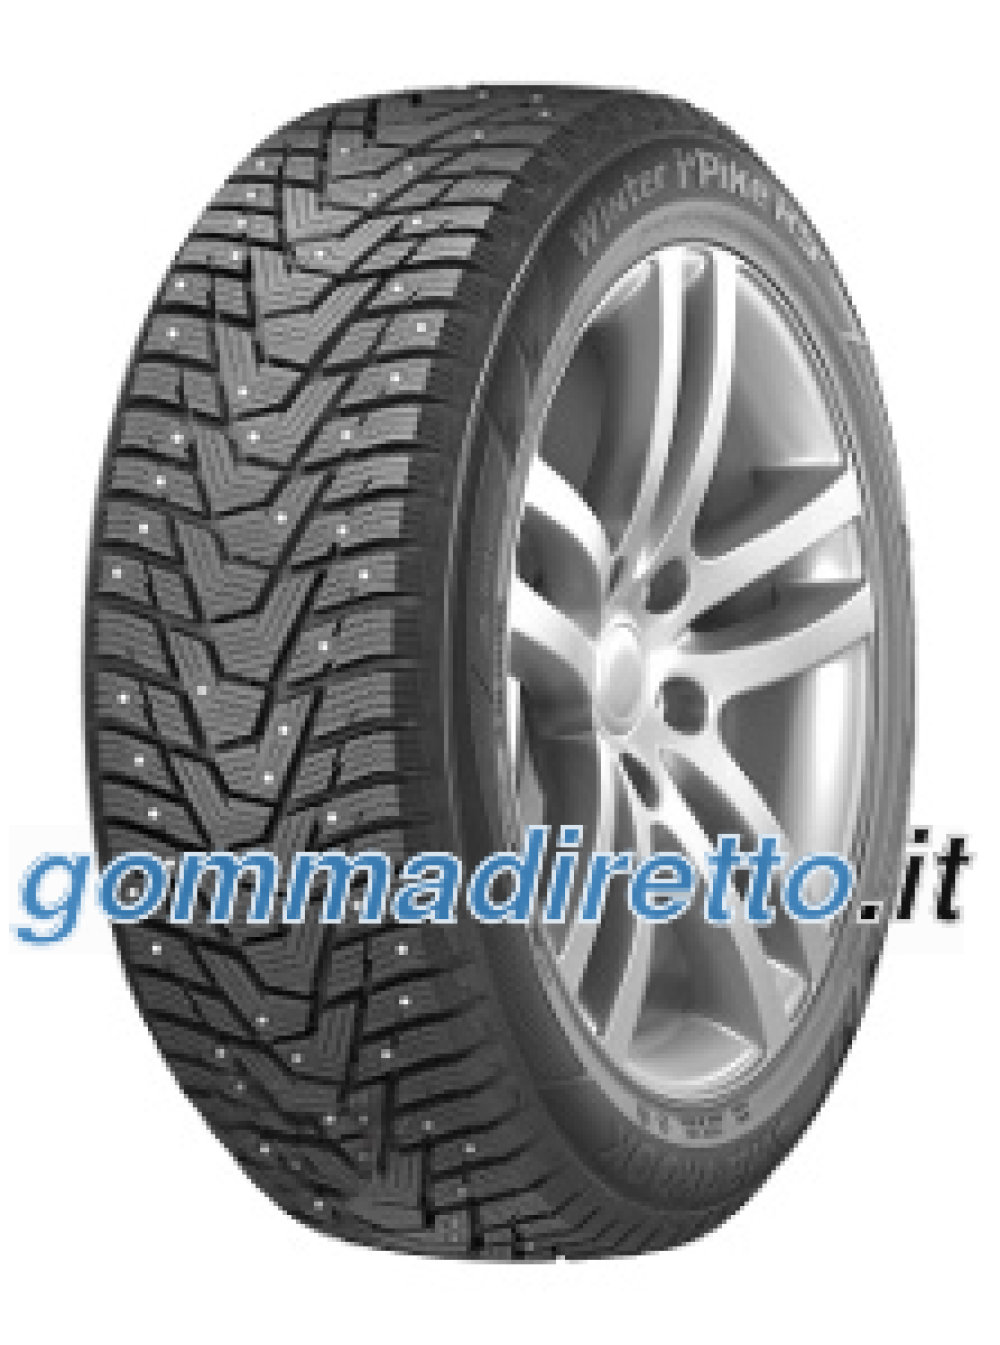 Image of Hankook Winter I*Pike RS2 W429 ( 245/50 R18 104T XL, pneumatico chiodato SBL )